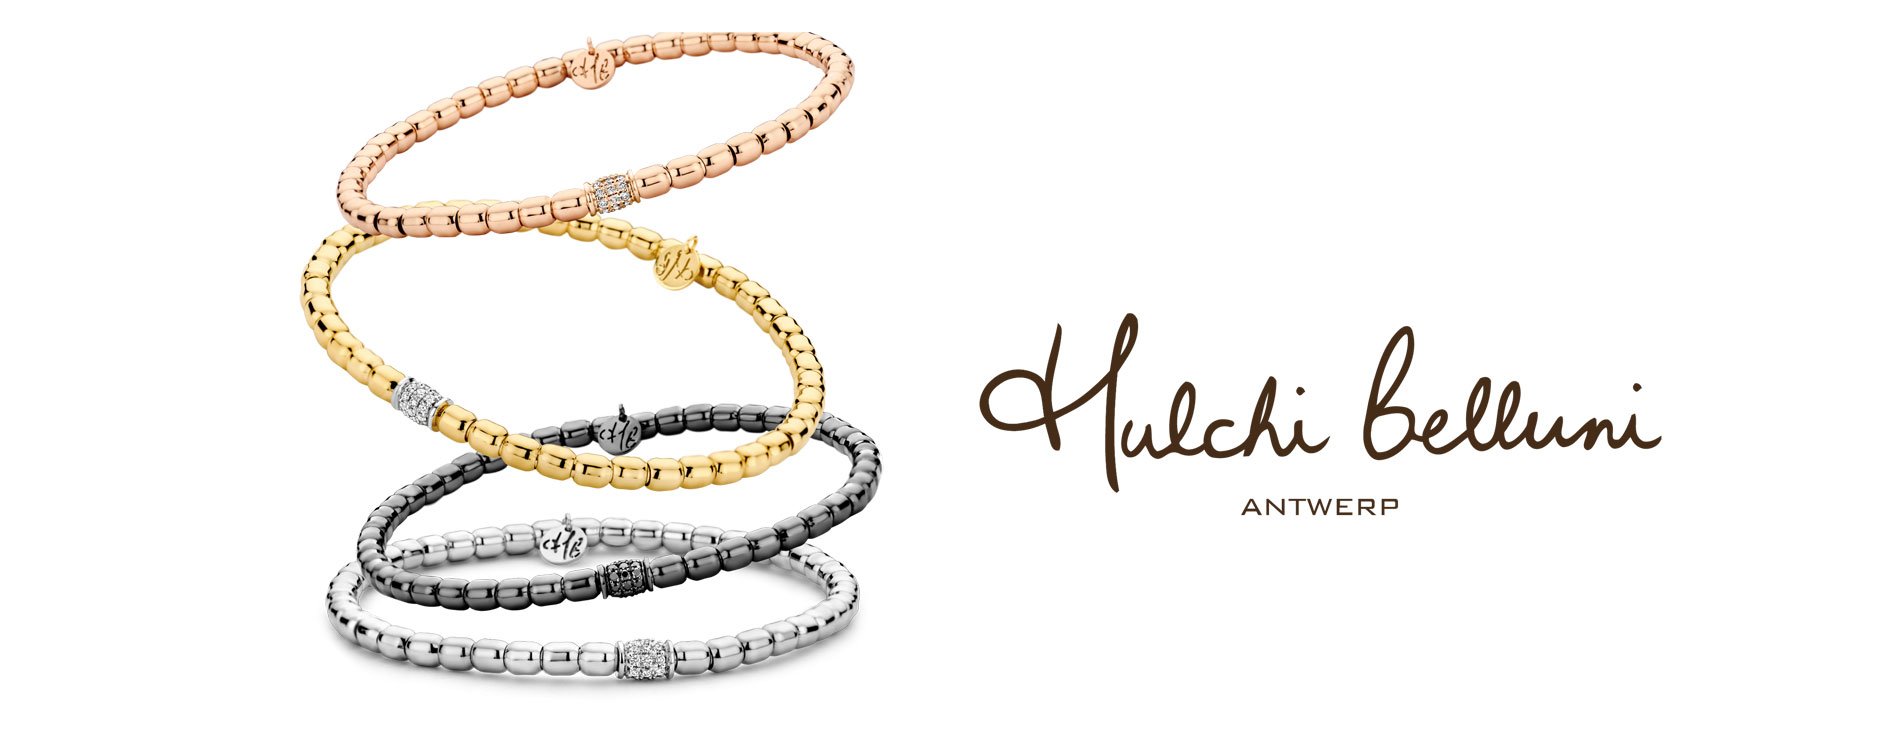 Hulchi Belluni Collections at Louis Anthony Jewelers, Pittsburgh PA